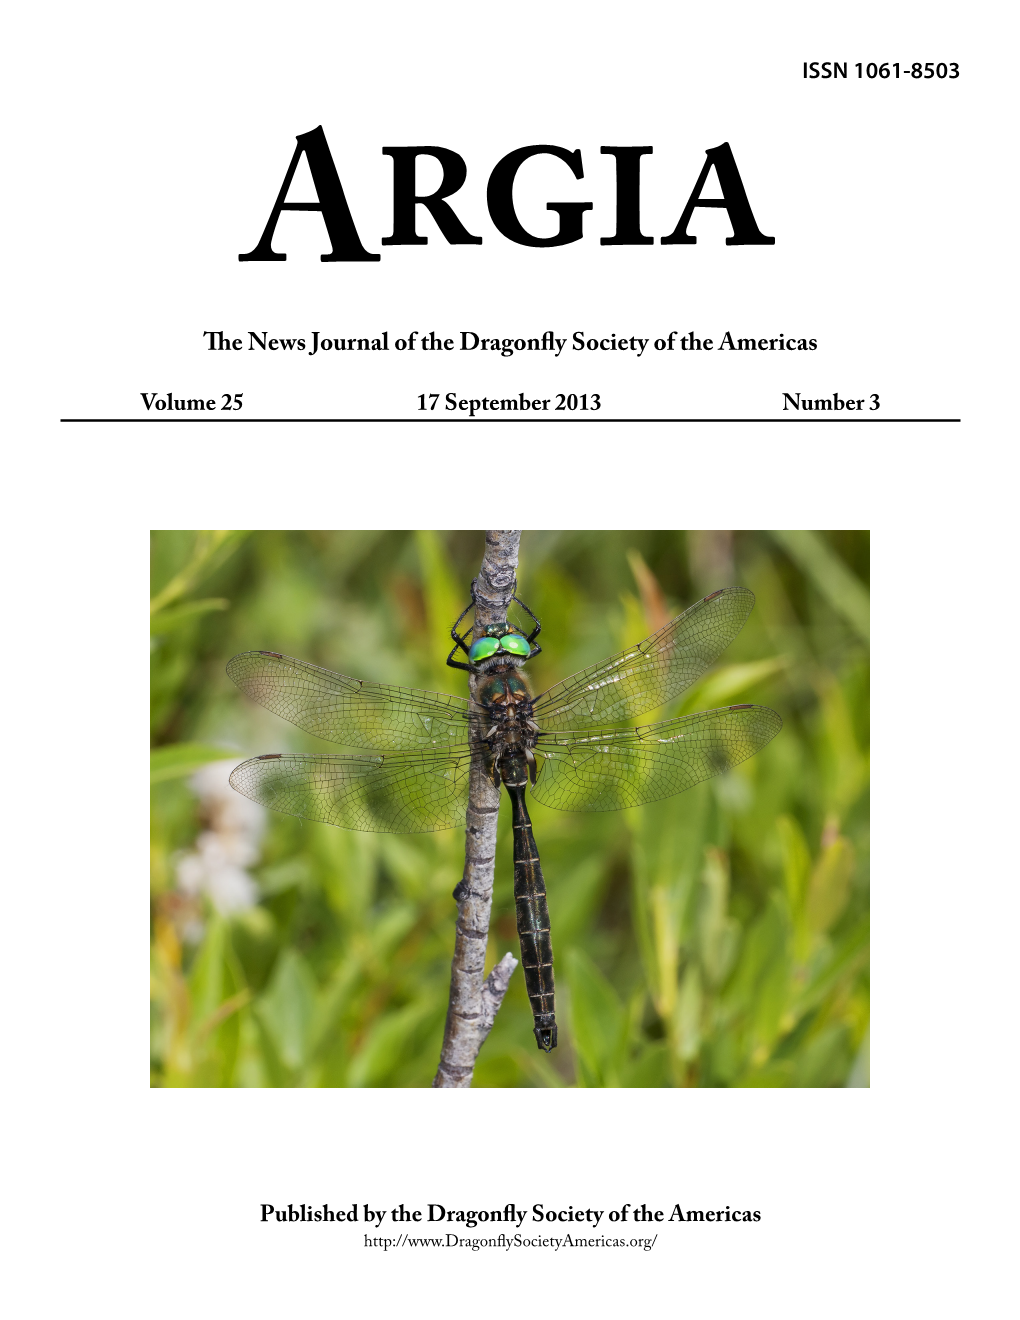 The News Journal of the Dragonfly Society of the Americas